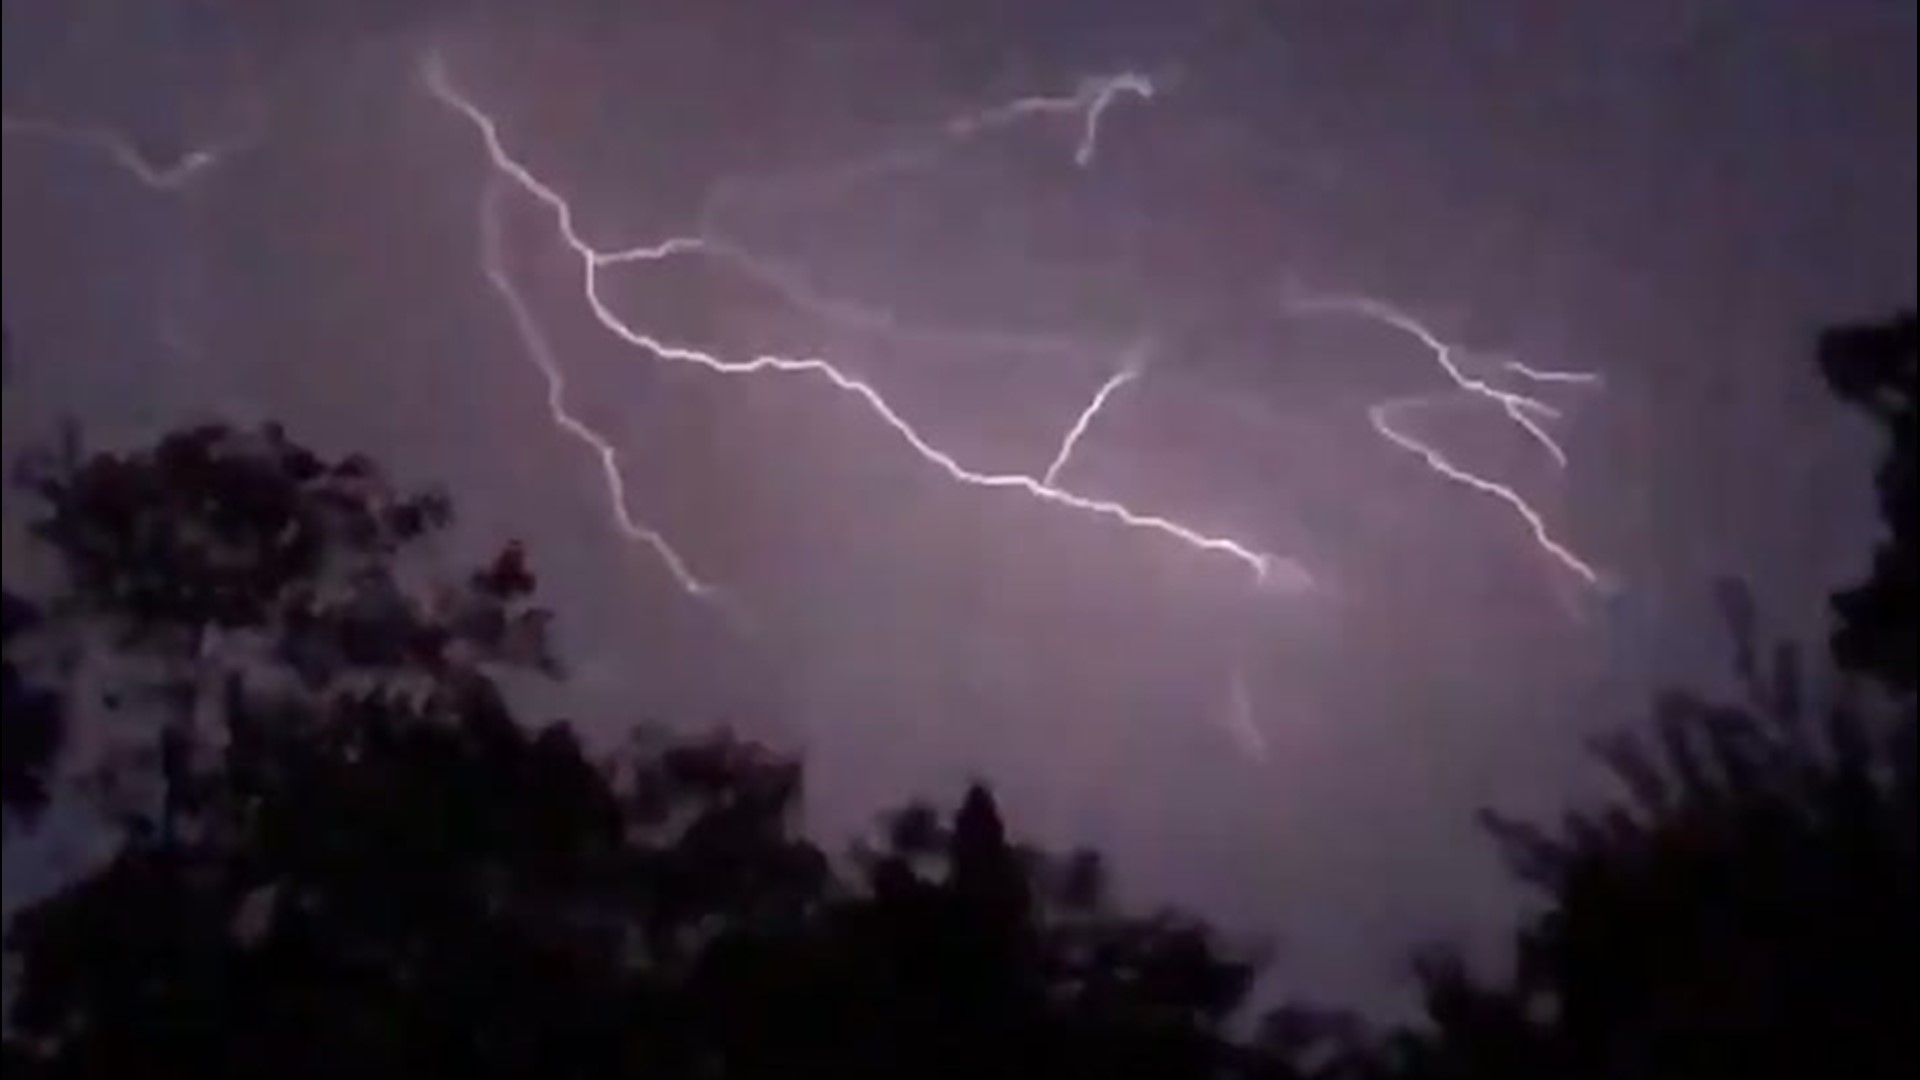 Lightning put on a show as it scattered across the night sky over Greensboro, North Carolina, on July 5.